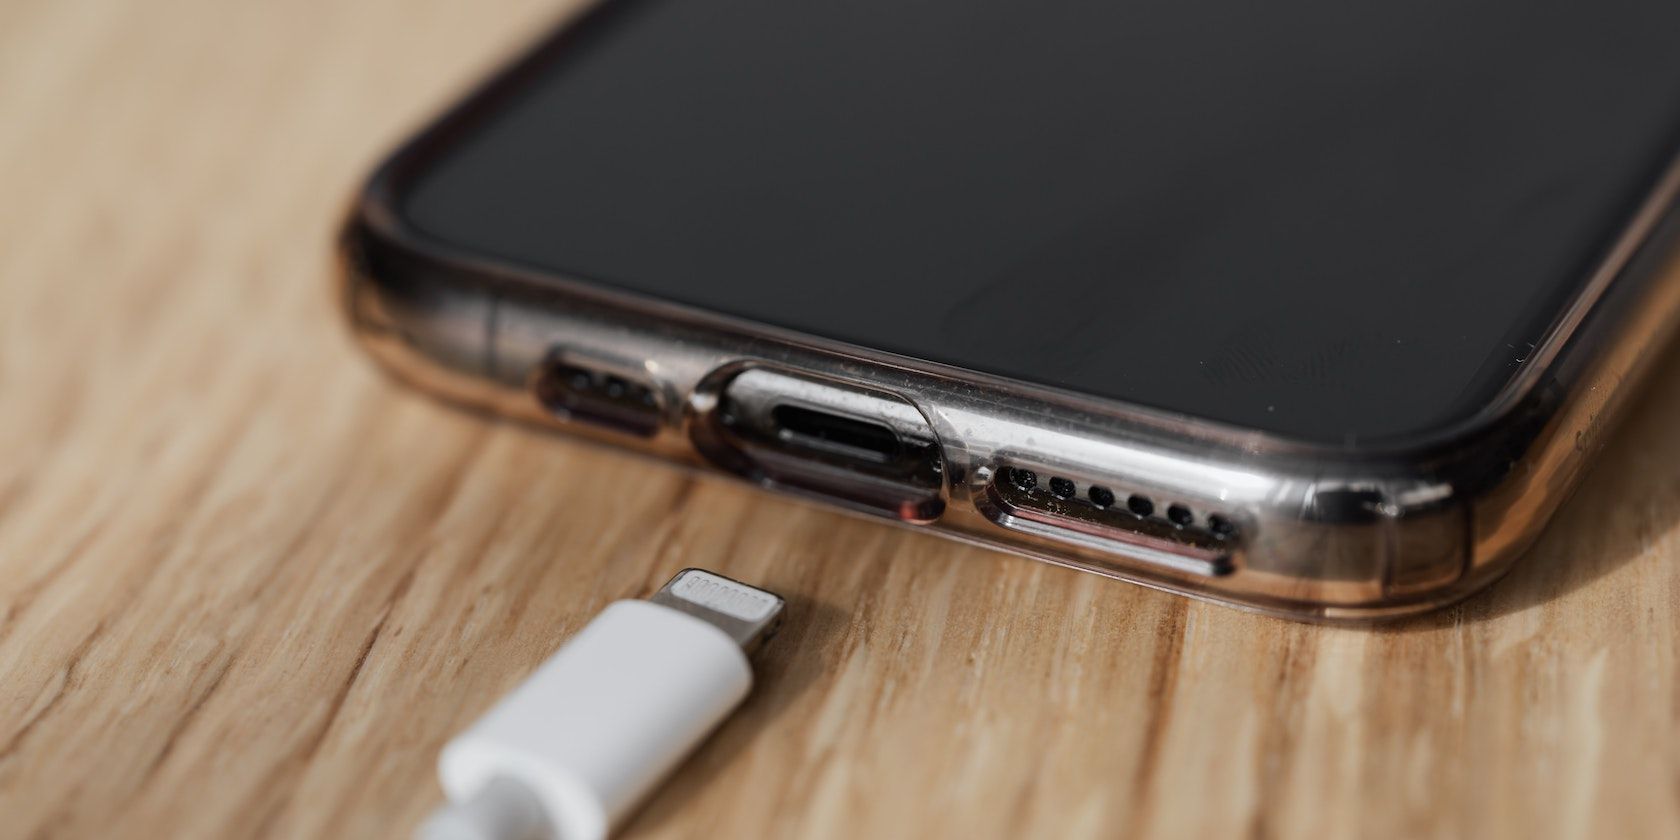 Why you shouldn't buy cheap iPhone cables: Avoid unofficial Lightning cable